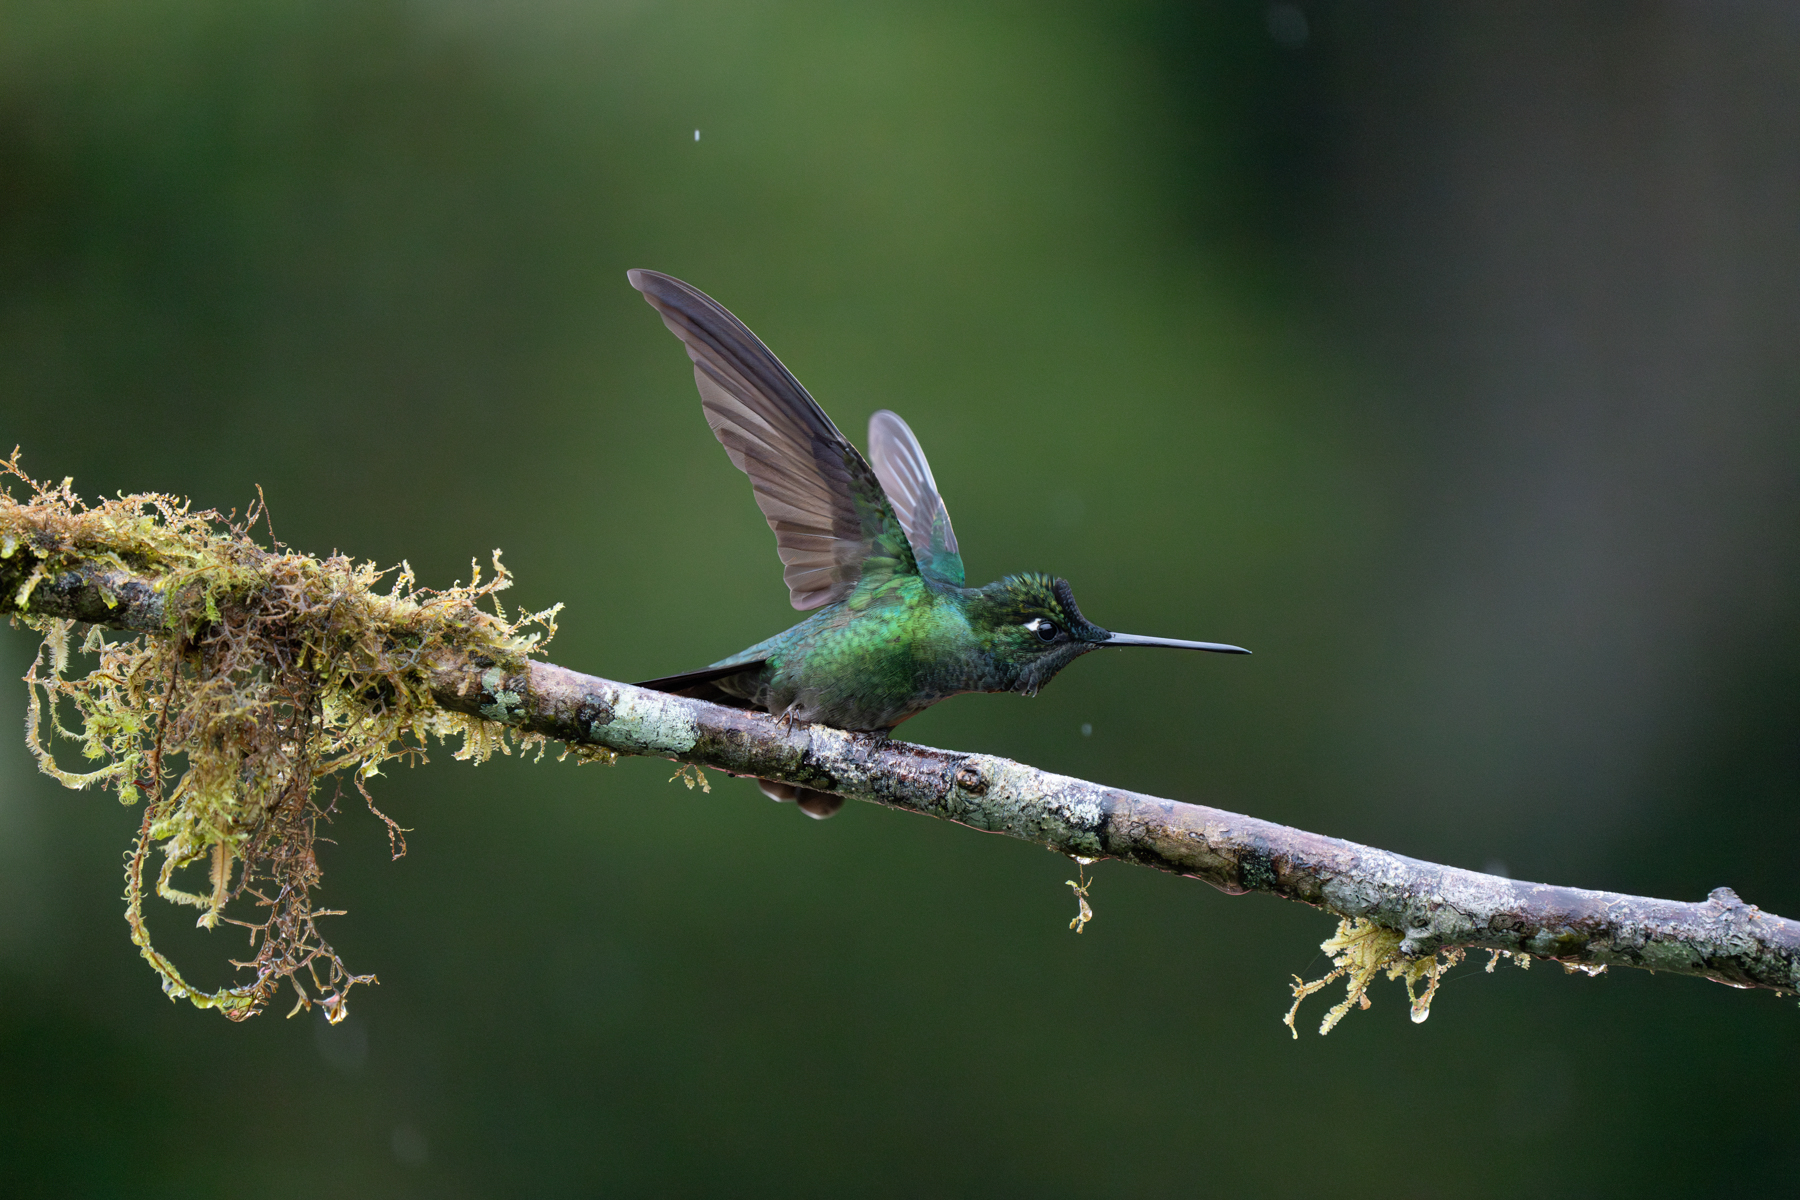 A Fiery-throated Hummingbird takes an aggressive pose (image by Inger Vandyke)